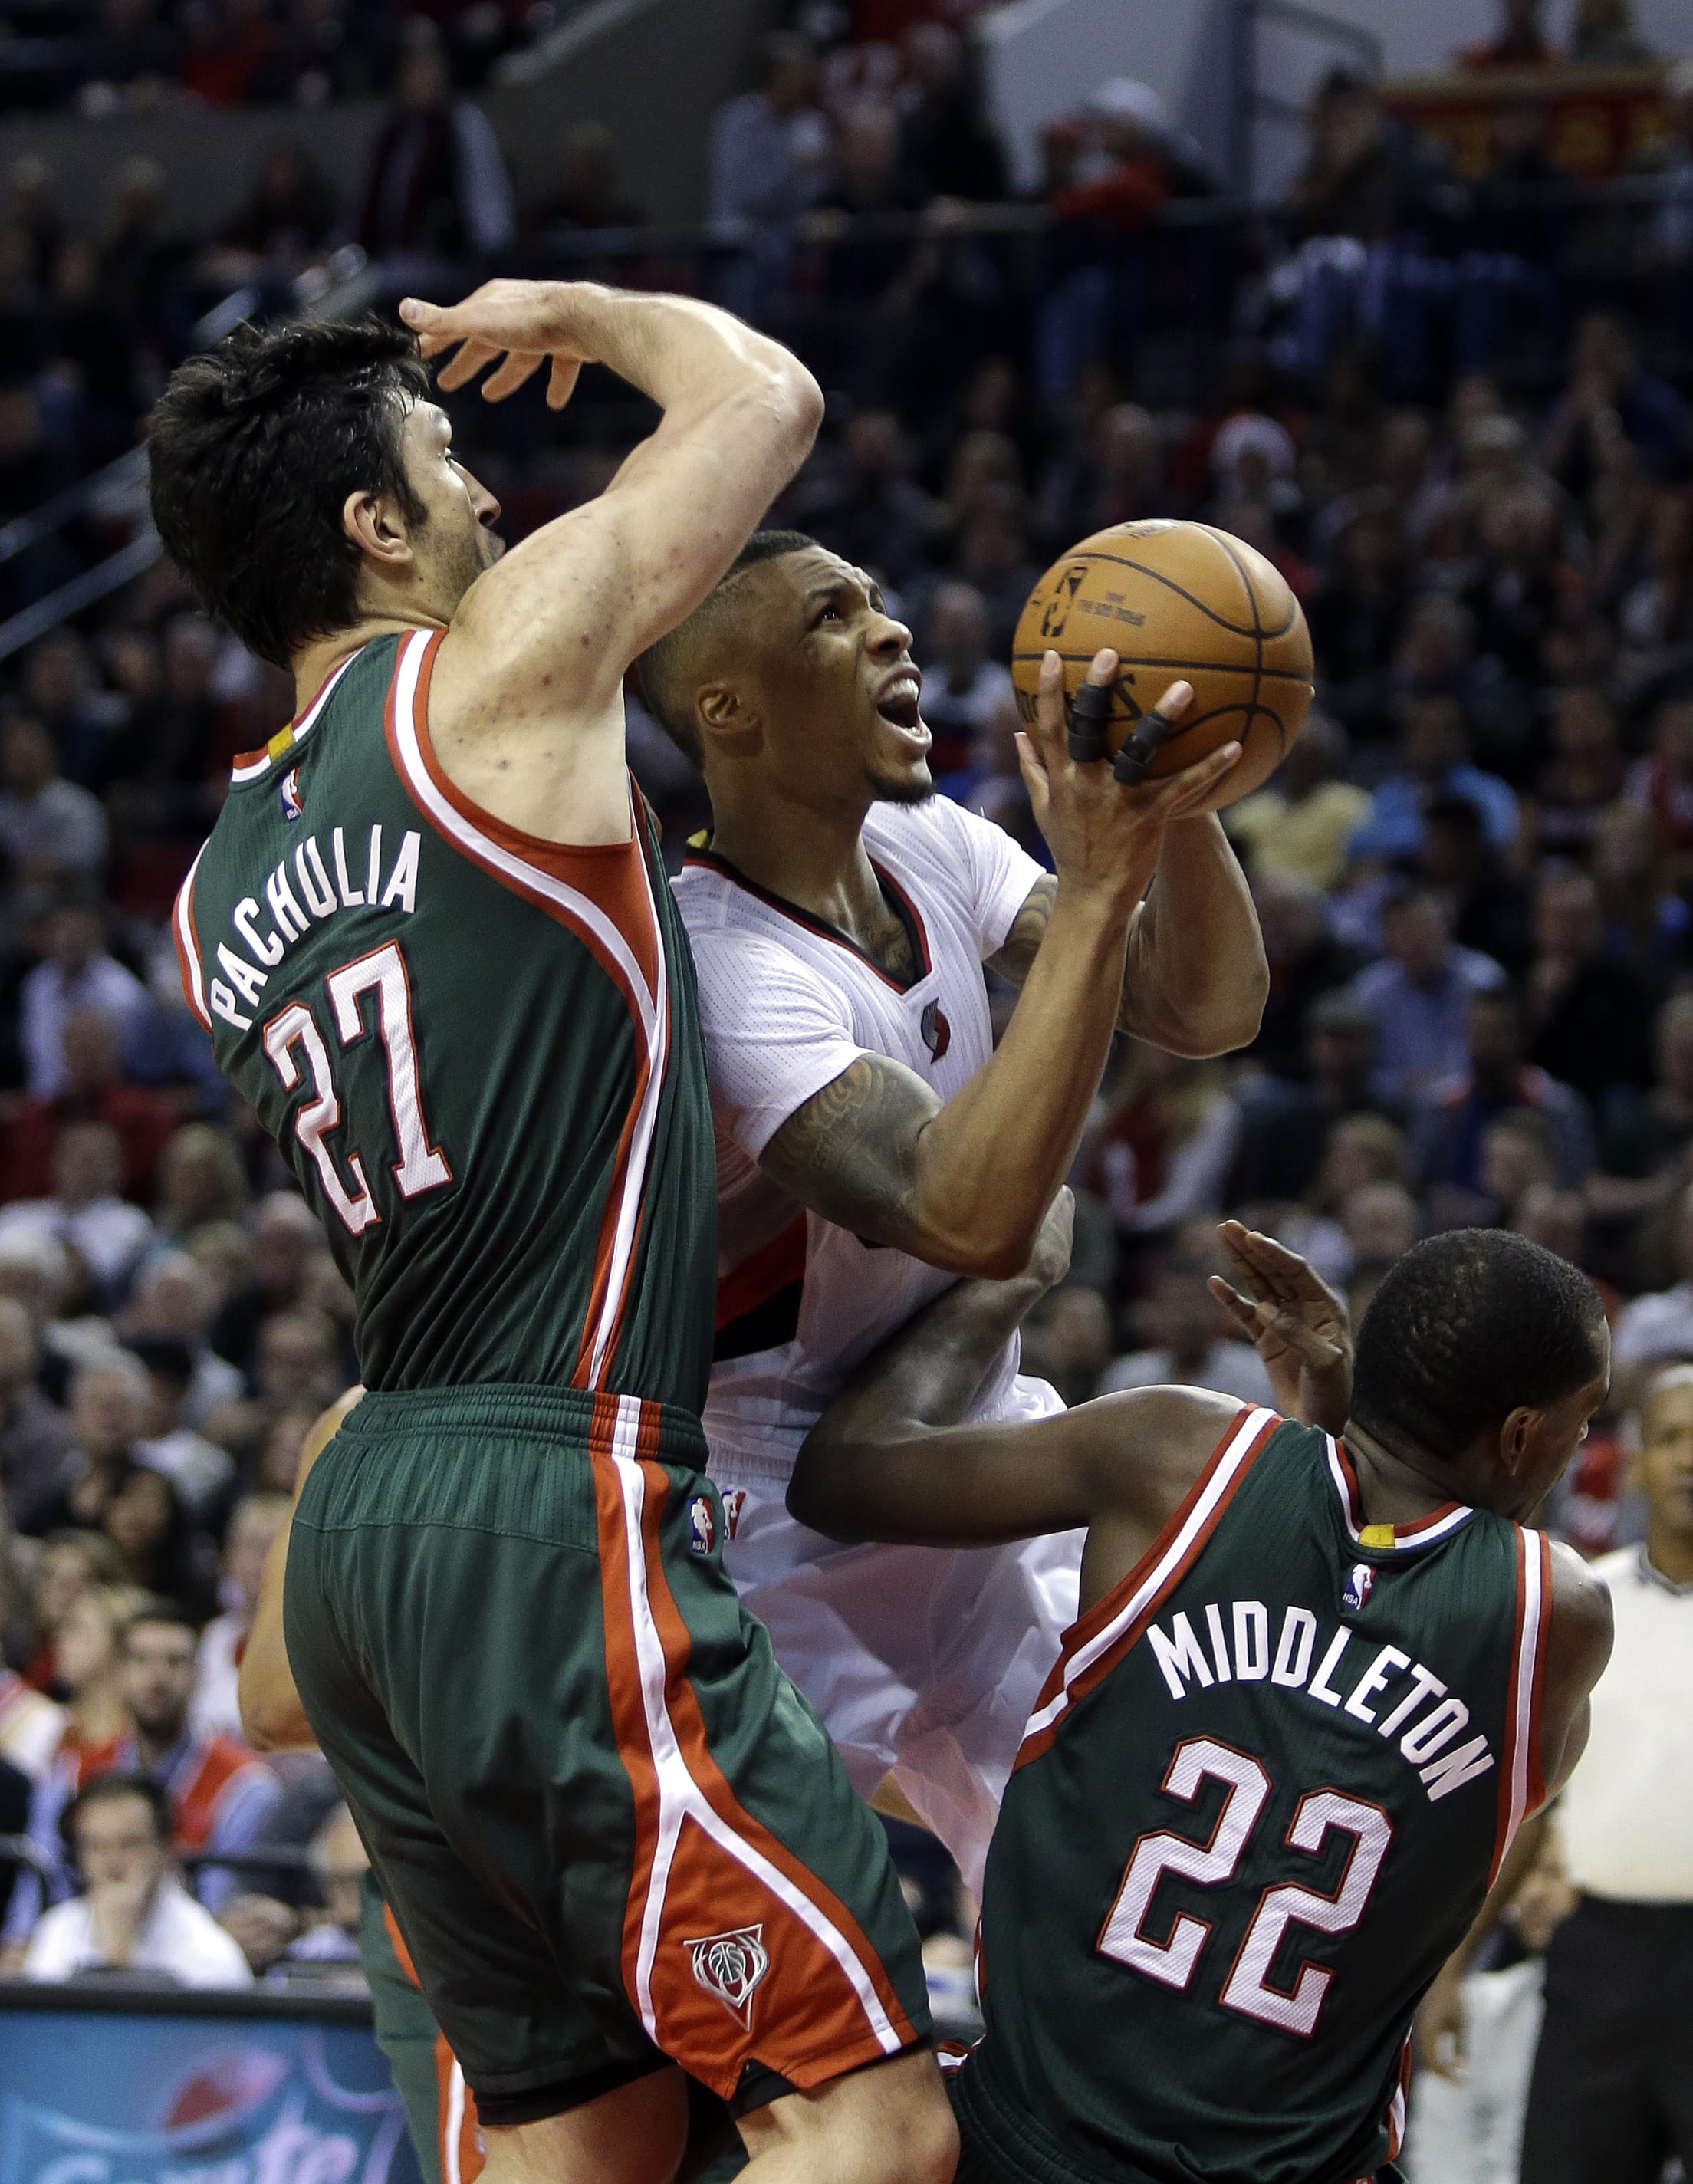 Don Ryan/Associated Press
Portland guard Damian Lillard, middle, drives to the basket between Milwaukee Bucks' Zaza Pachulia, left, and Khris Middleton during the second half  Wednesday. Lillard led the Trail Blazers in scoring with 29 points as they defeated the Bucks 104-97.